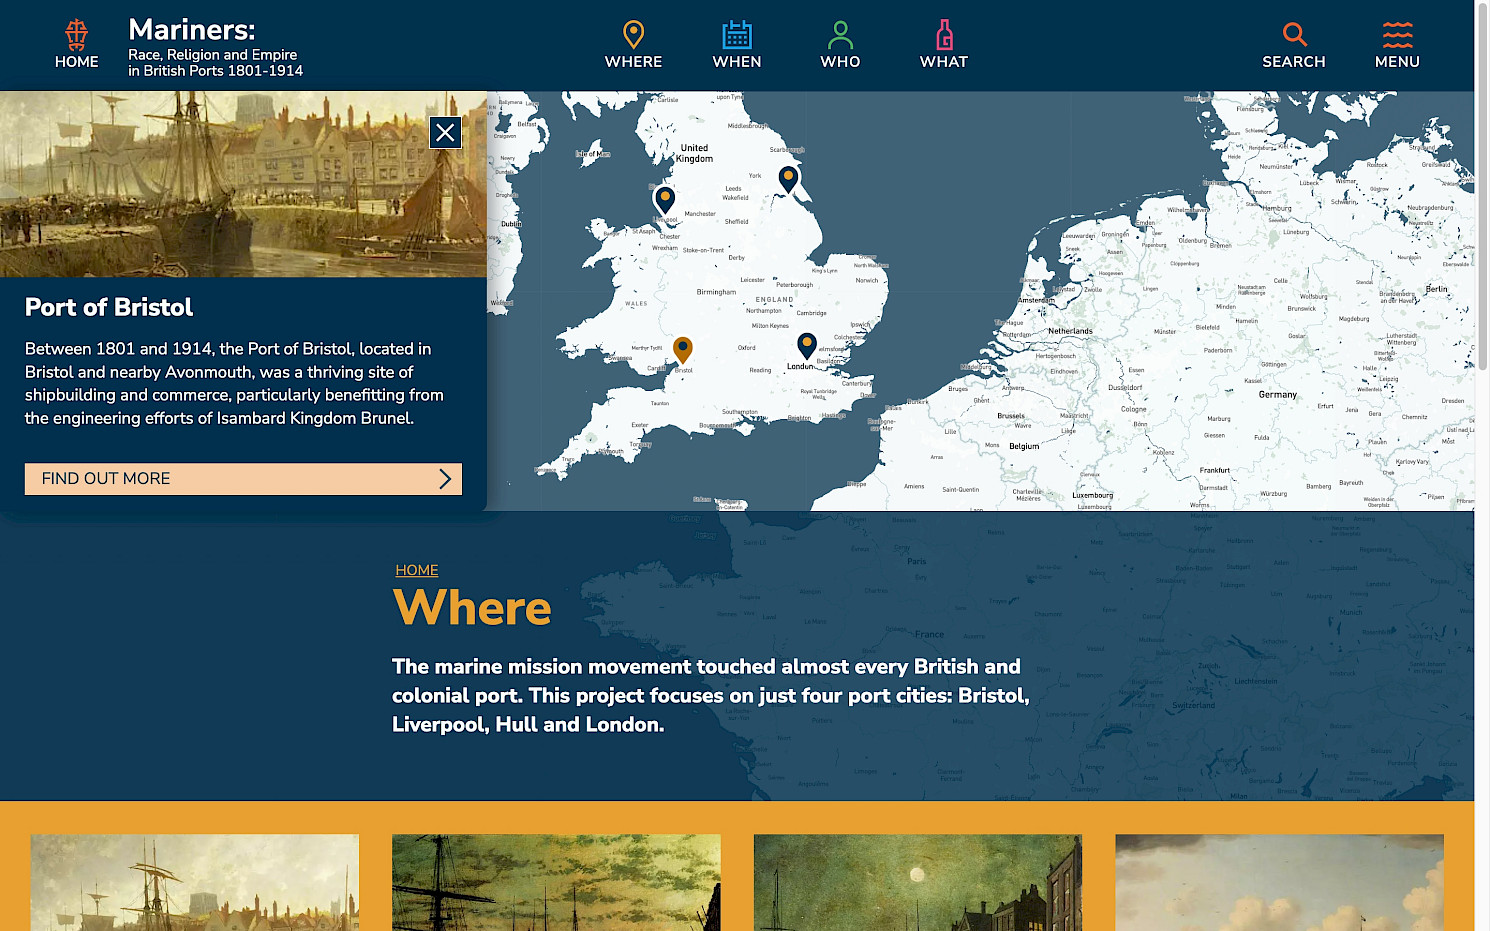 Screenshot of the website showing a map of locations